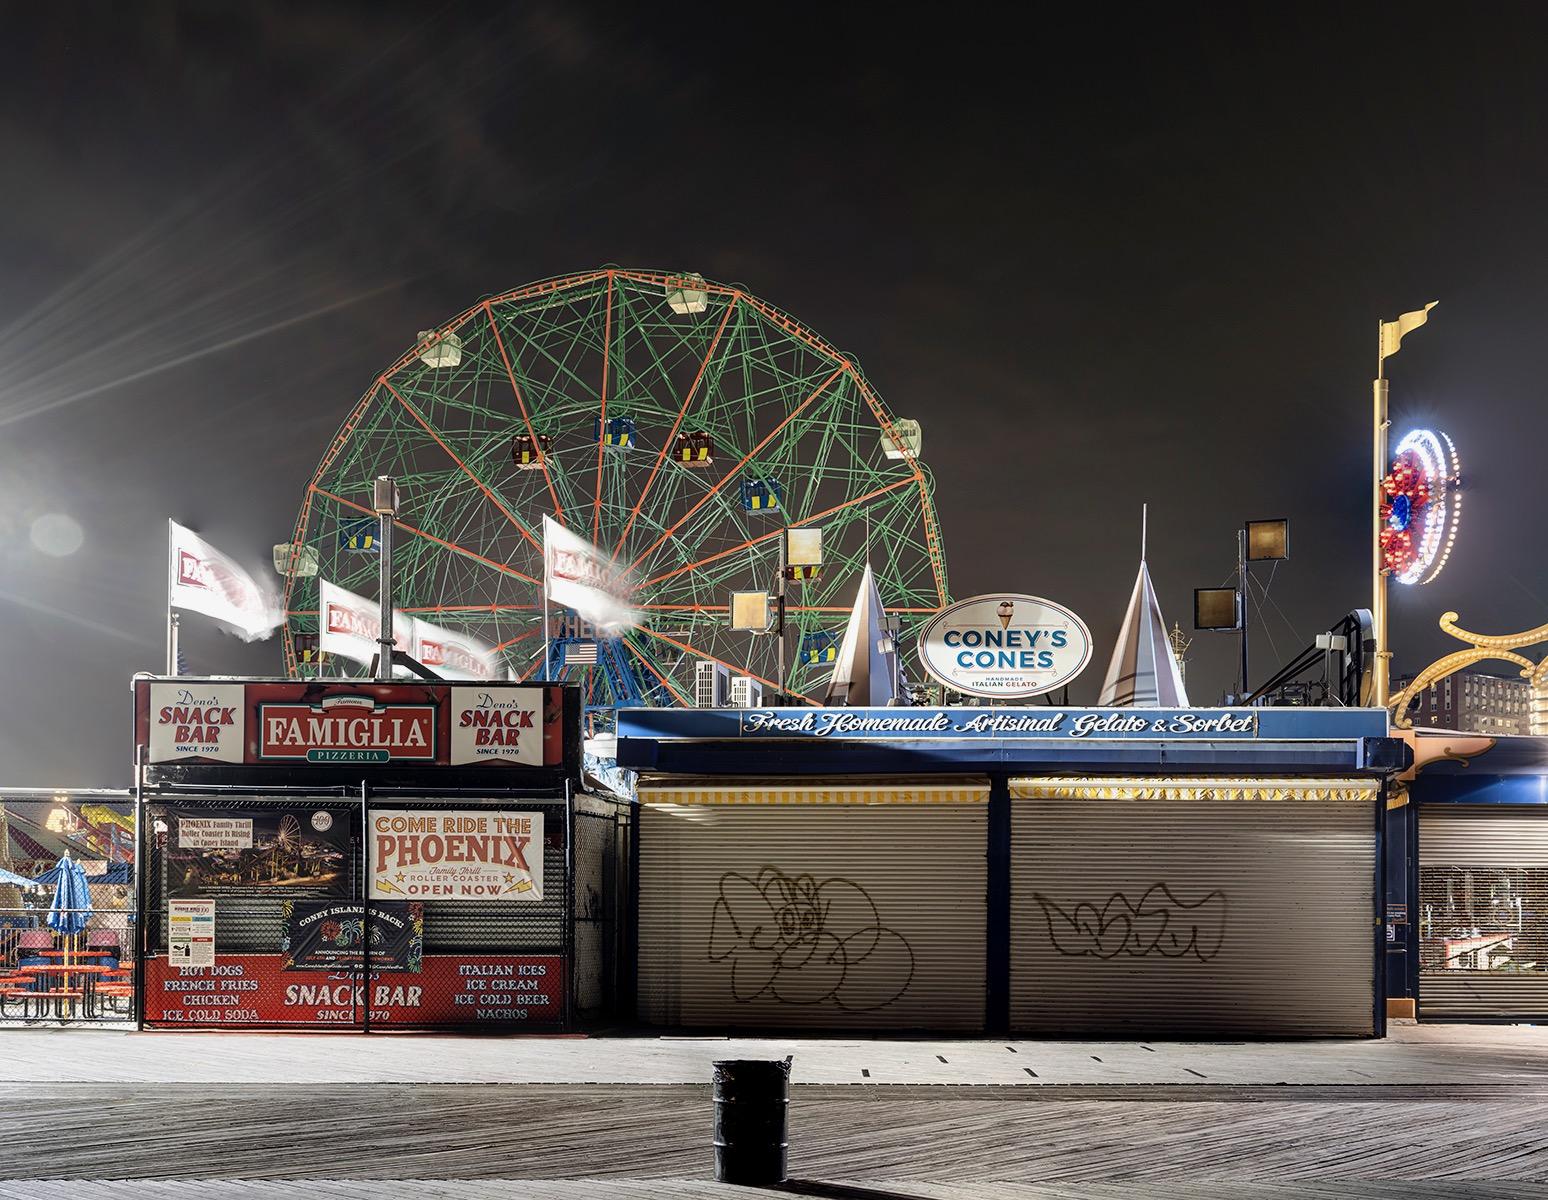 Mark S. Kornbluth Color Photograph - Coney's Cones